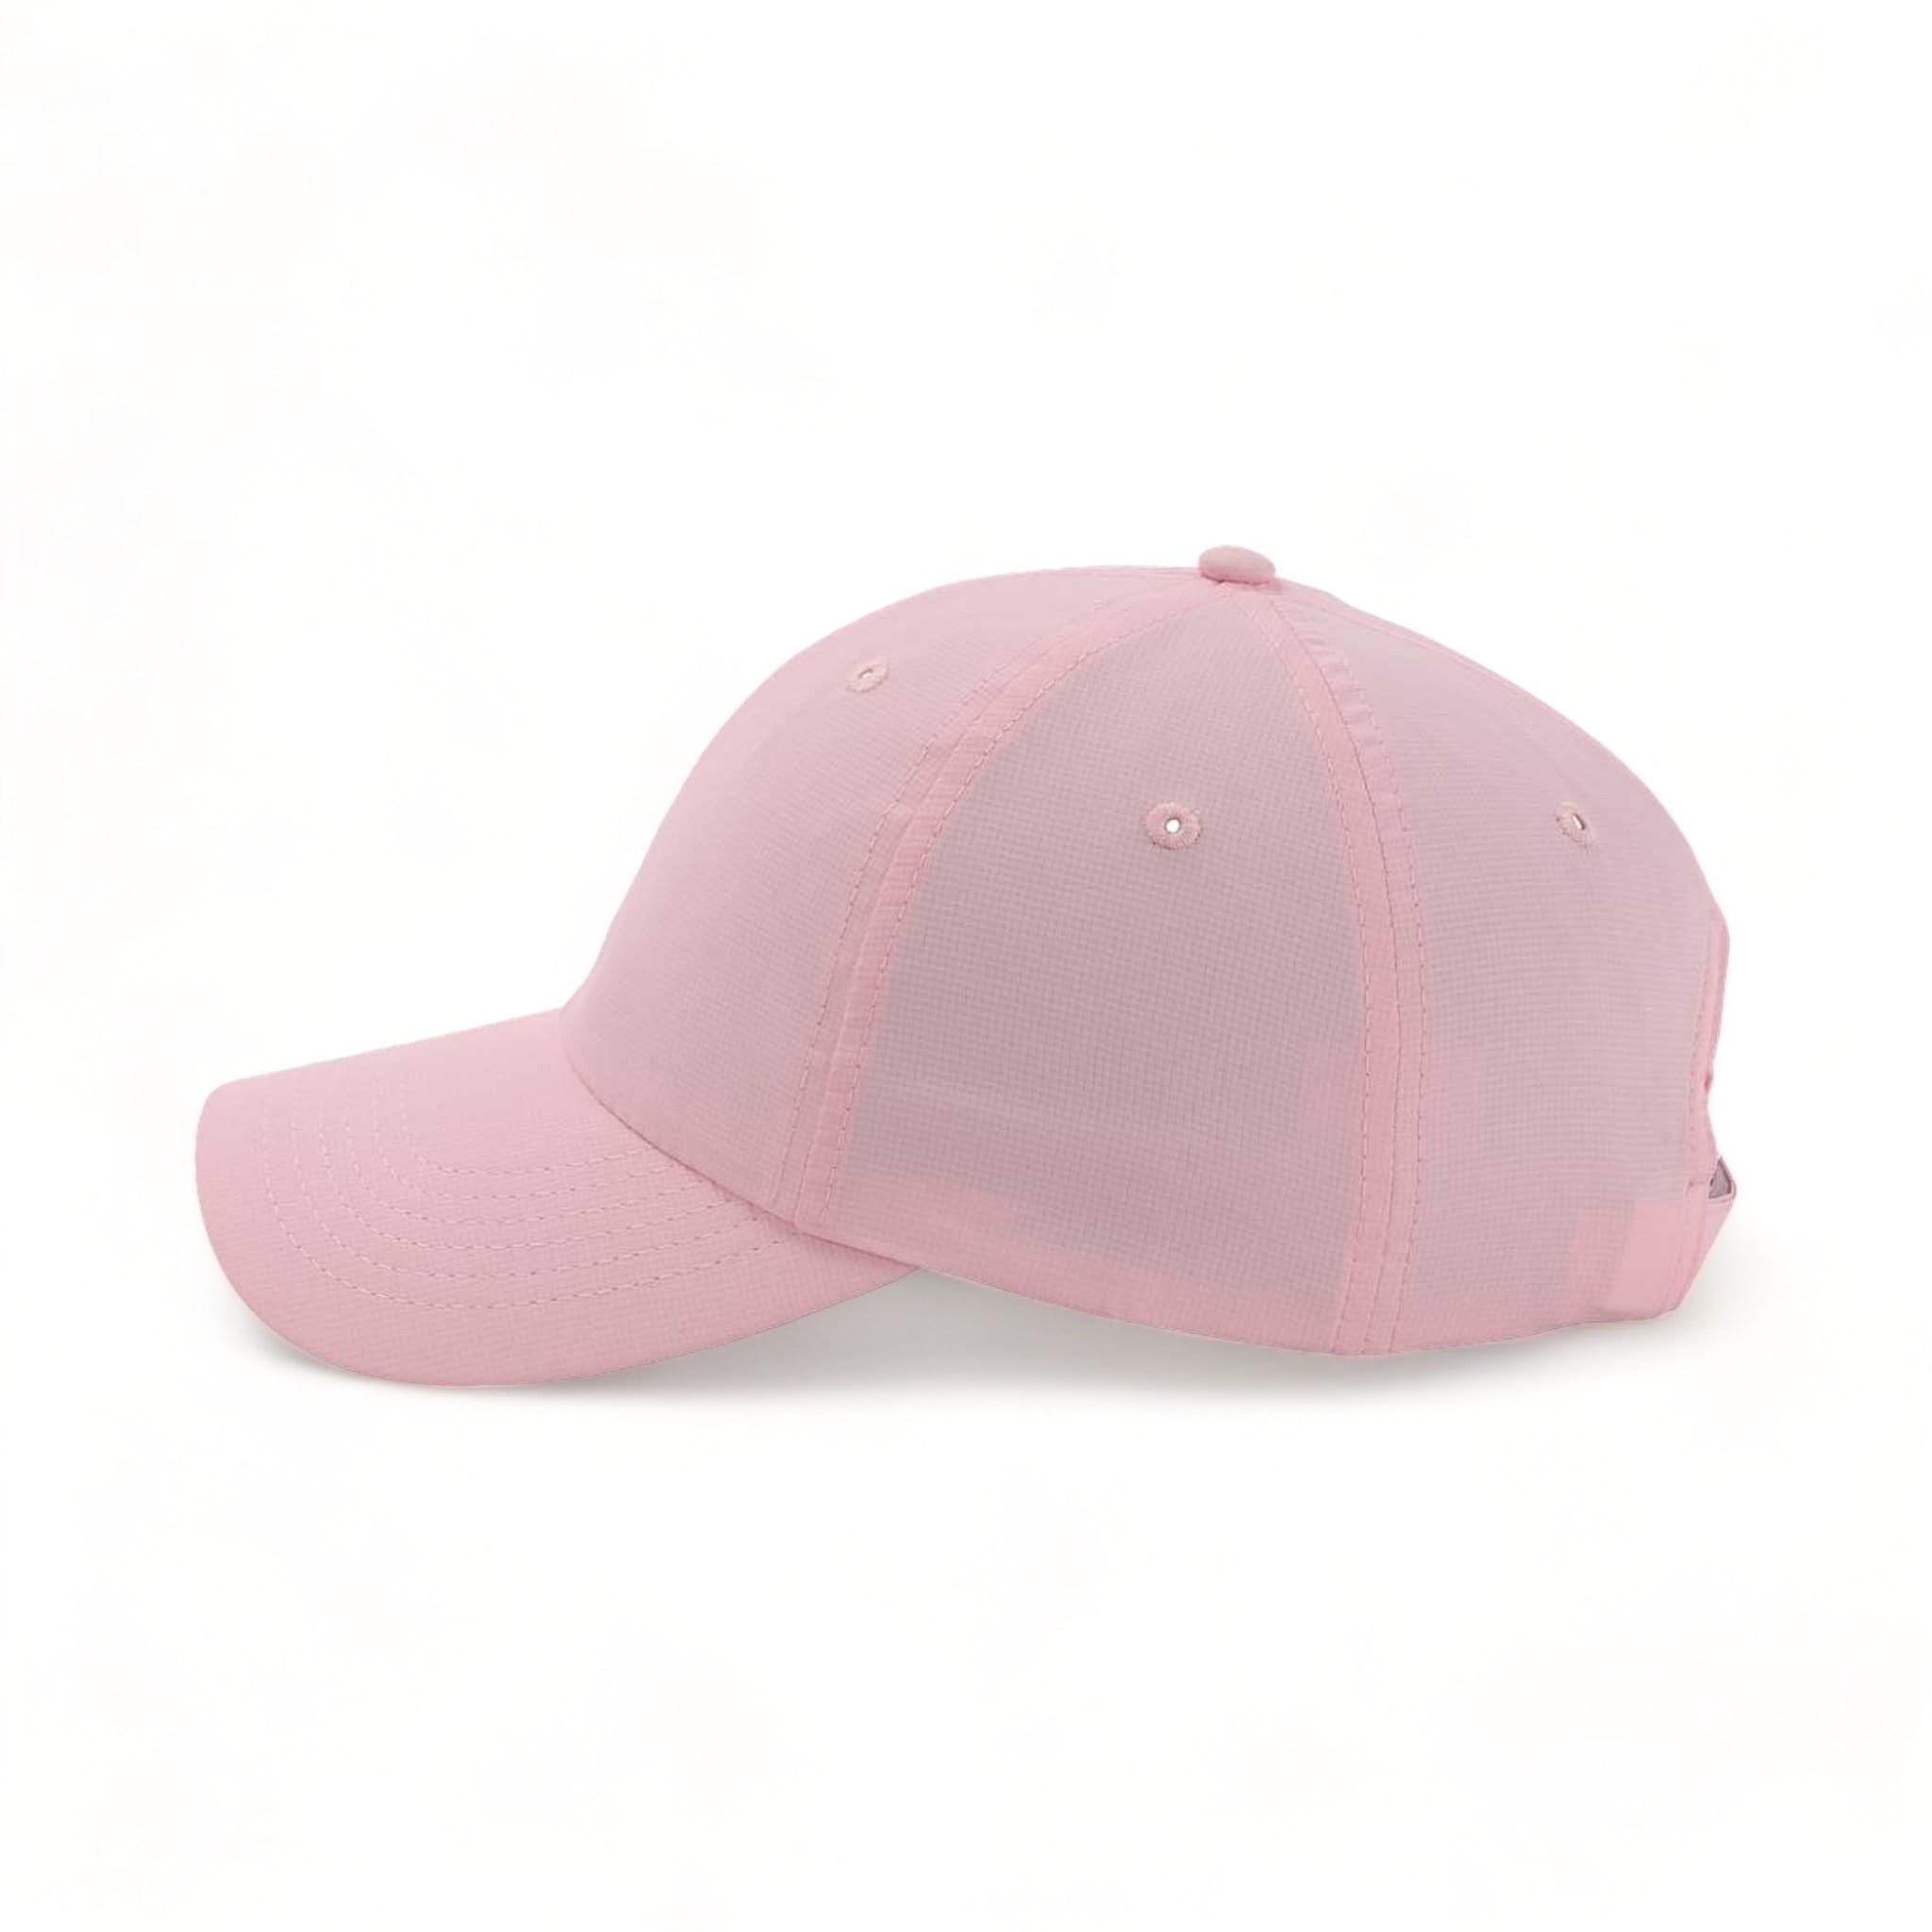 Side view of Imperial X210P custom hat in light pink